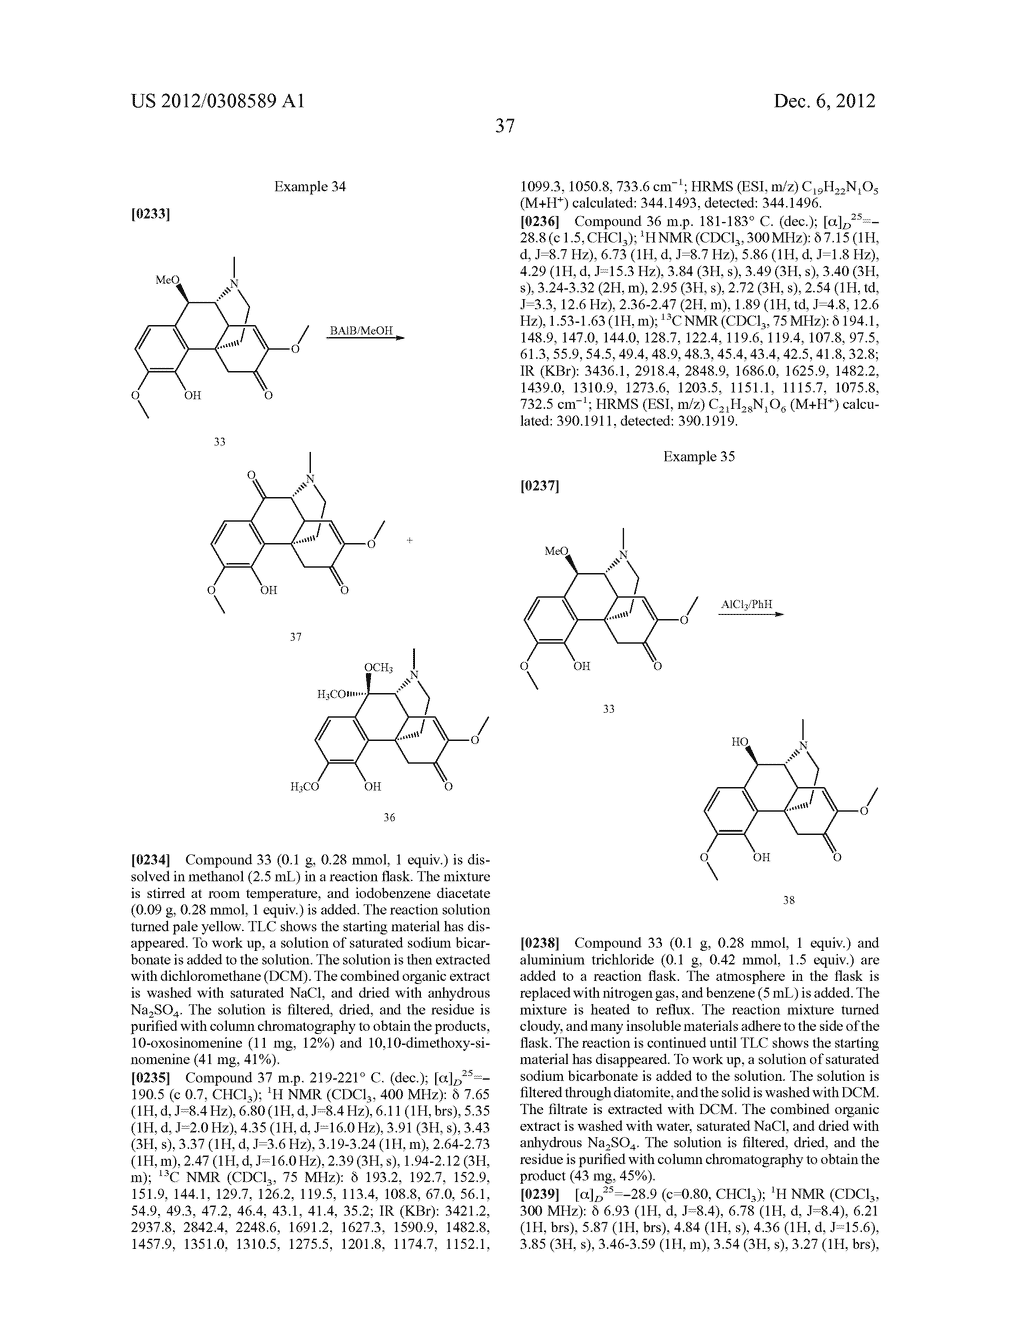 SINOMENINE DERIVATIVES, SYNTHETIC METHODS AND USES THEREOF - diagram, schematic, and image 41